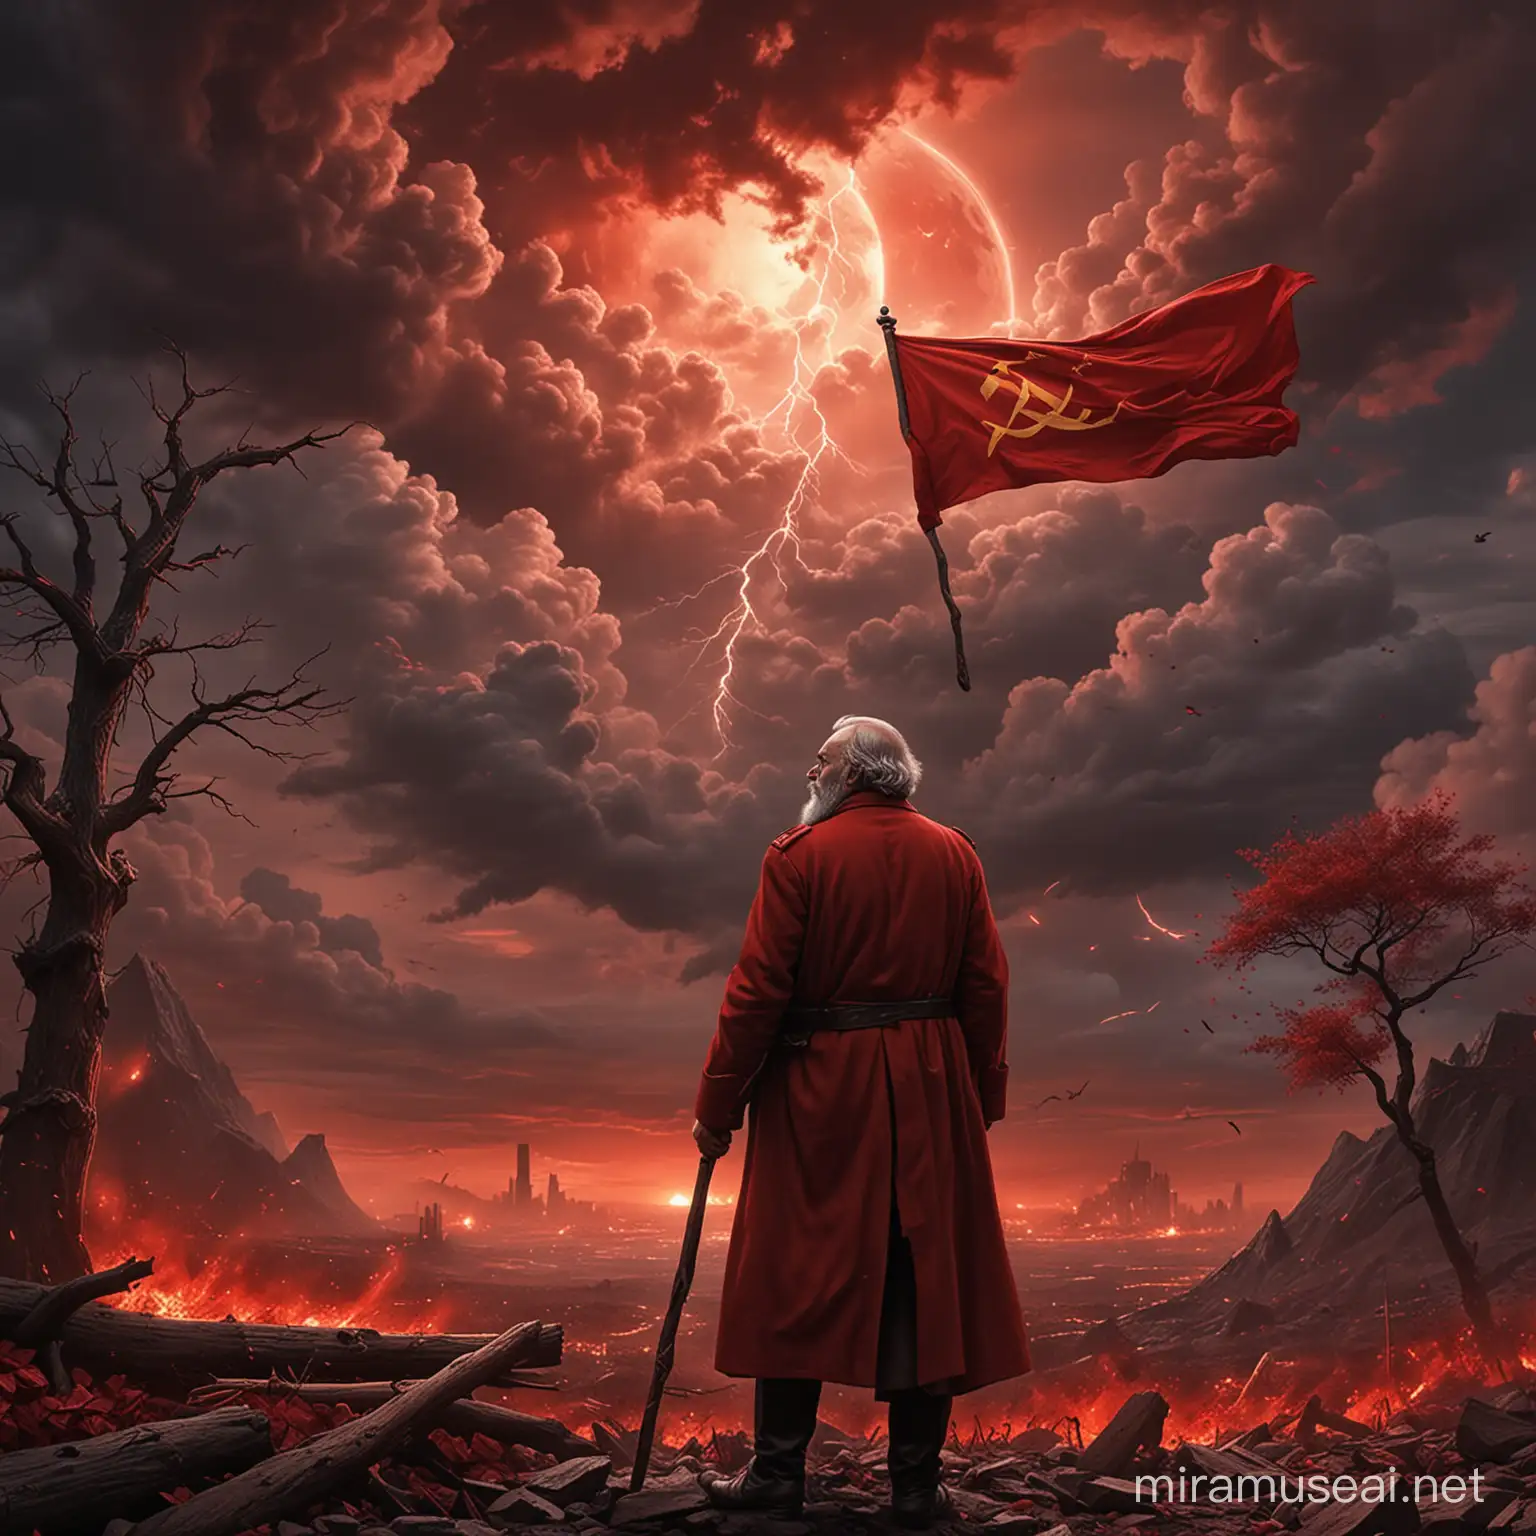 With an imperious gesture, Karl marx,Engels ,Lenin, stalin an Mao. raises the red flag with hammer and sickle towards the darkened skies. Instantly, red clouds swirl around them, obeying their malevolent will. A deep rumble echoes through the air as lightning streaks across the firmament, illuminating the darkness of the night with a sinister red glow. The winds rage, whipping the earth with their devastating fury, uprooting trees and making the mountains tremble.  Under the unwavering gaze of them, the elements unleash in an infernal dance, revealing the undisputed power of the red flag. Mortals, terrified by this display of power, prostrate themselves before them, acknowledging their absolute sovereignty over the world , vibrant, hyper realistic, detailed illustration  Download